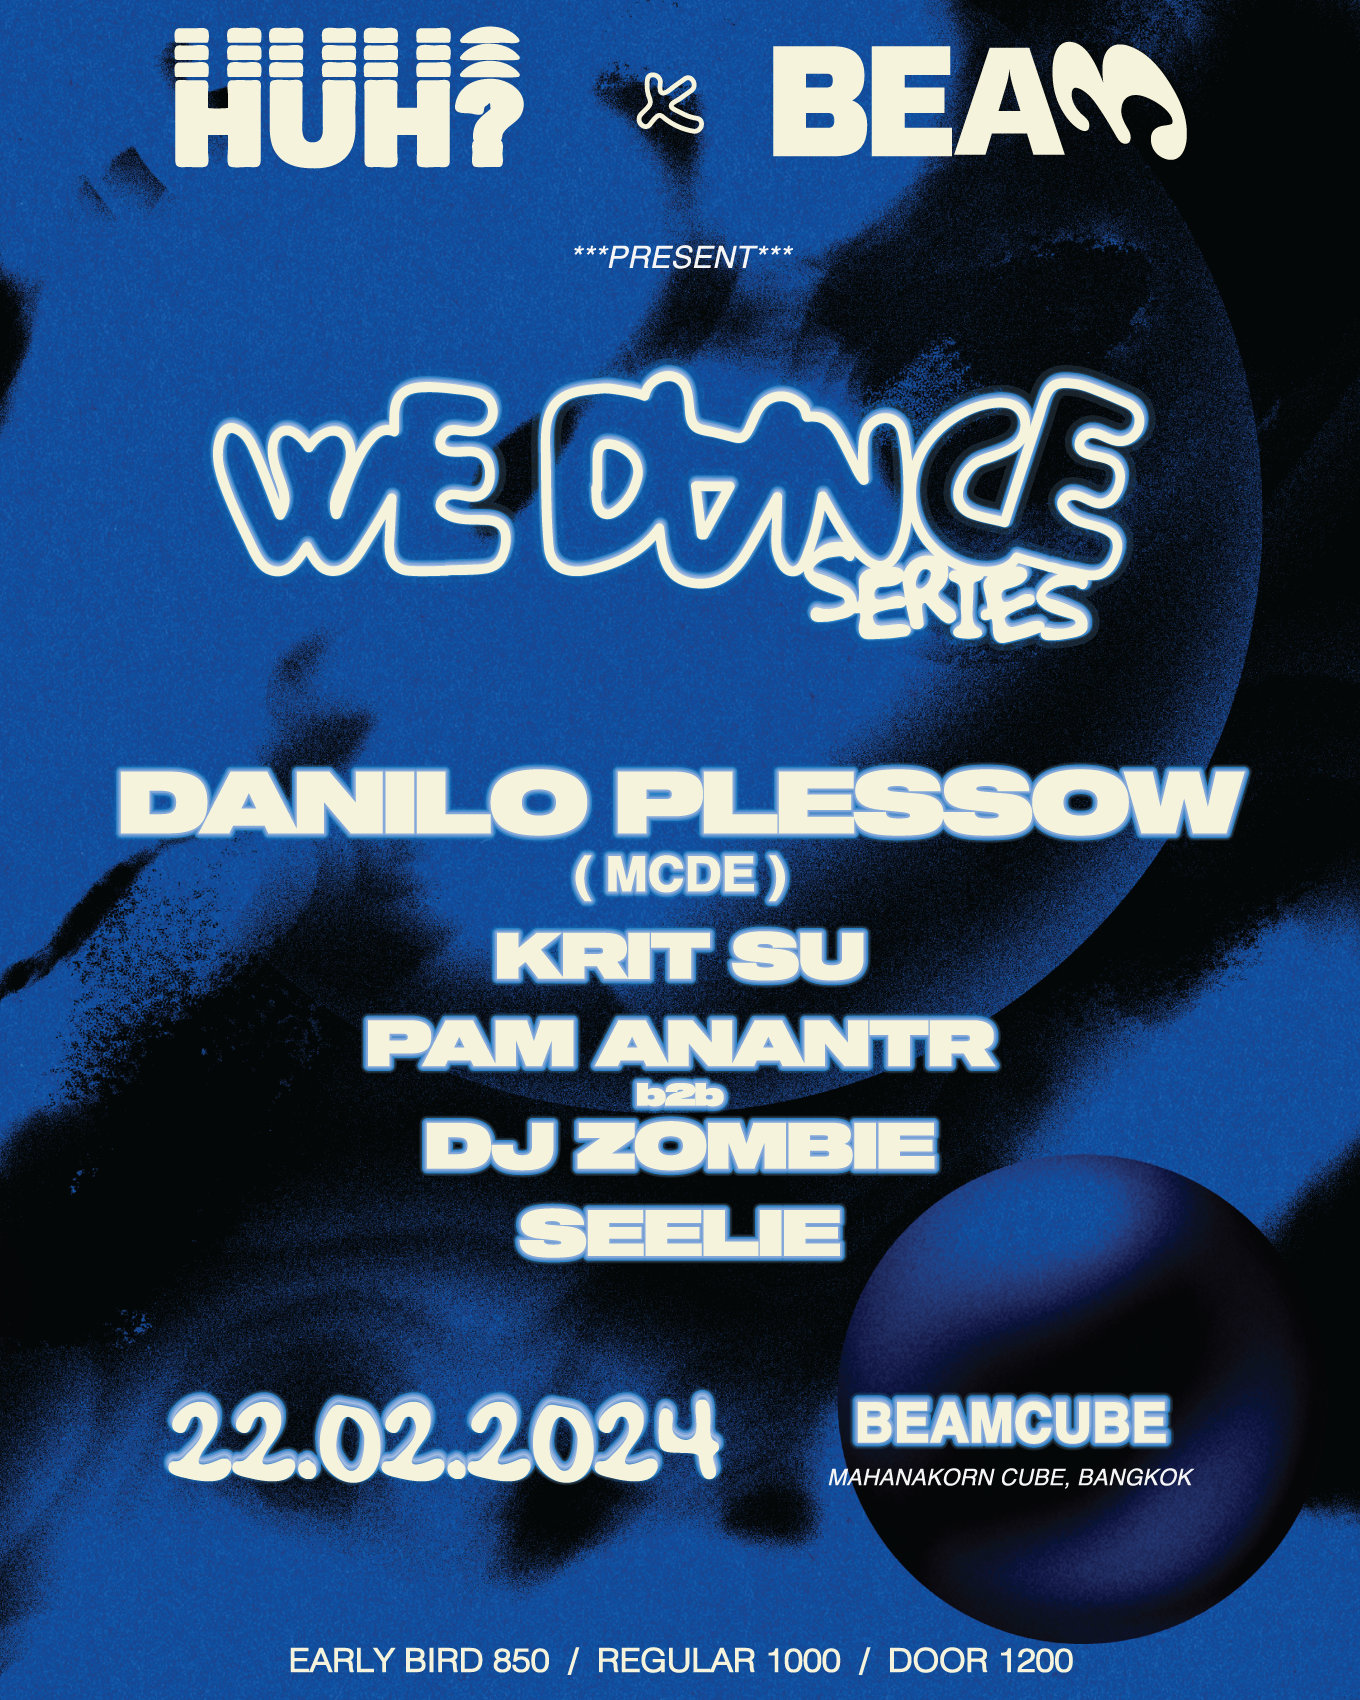 HUH? x Beamcube - 'WE DANCE' Series with Danilo Plessow (MCDE) - Página frontal